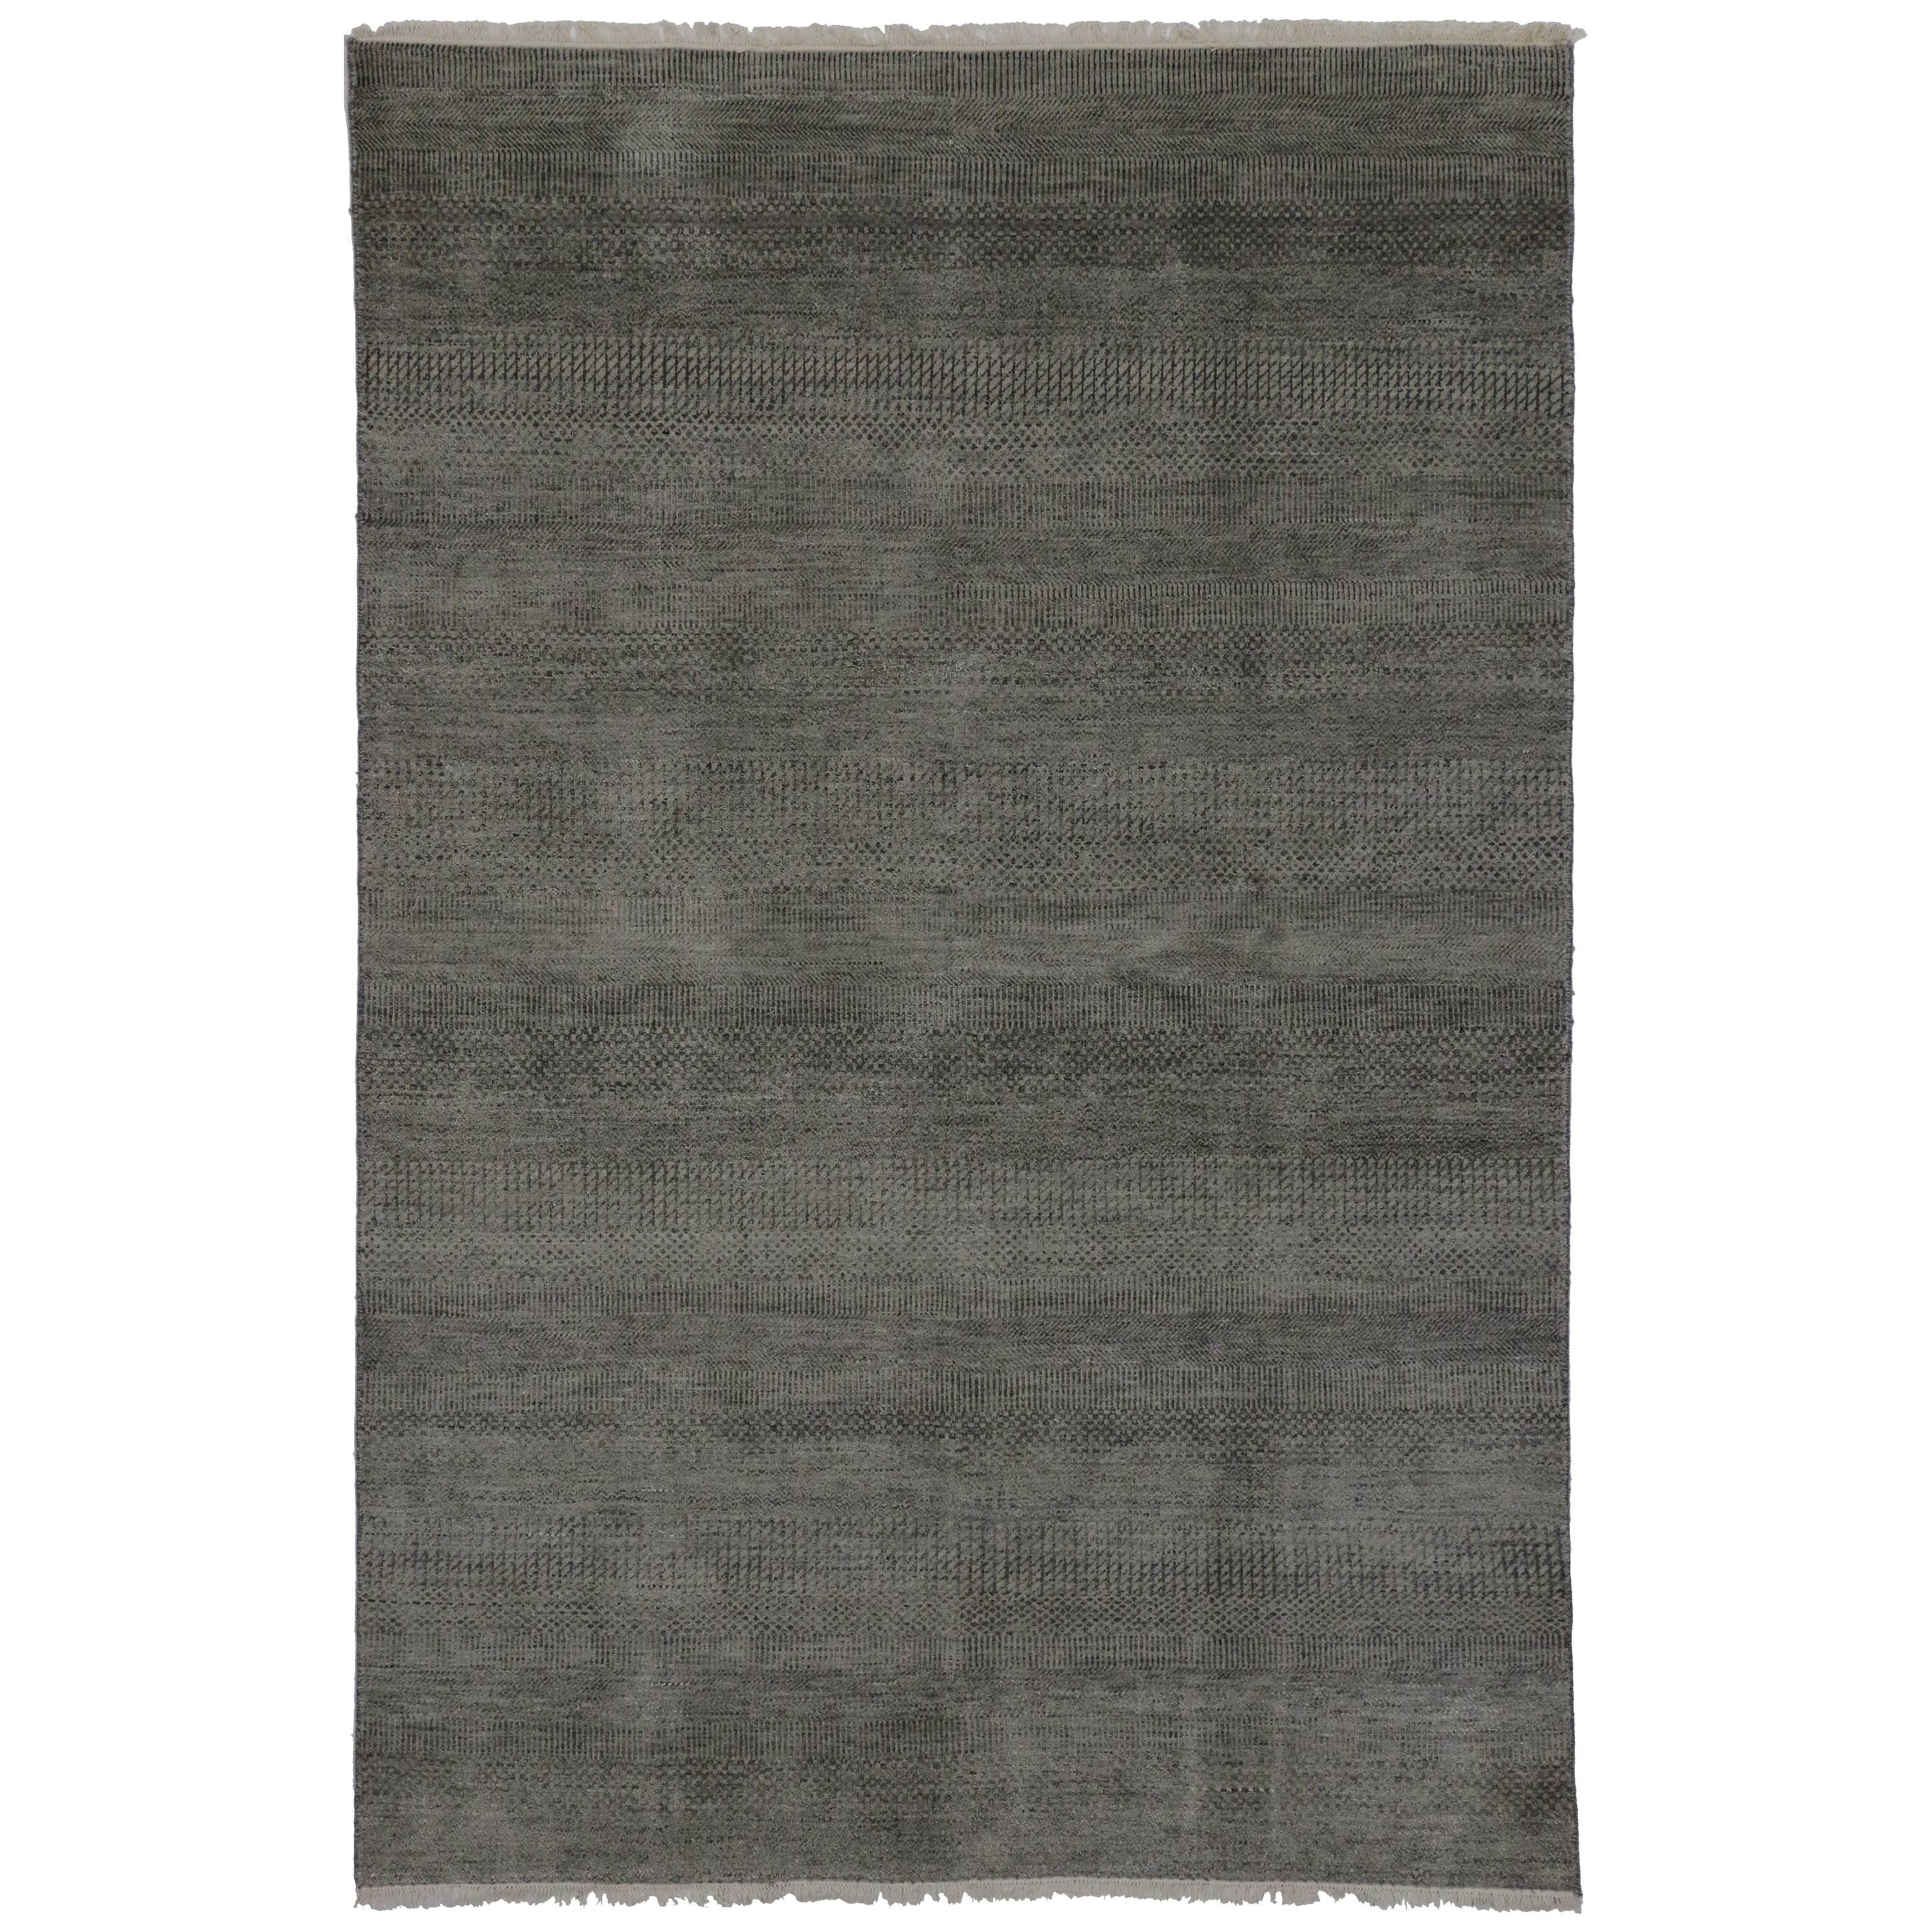 New Contemporary Transitional Gray Area Rug with Minimalist International Style 